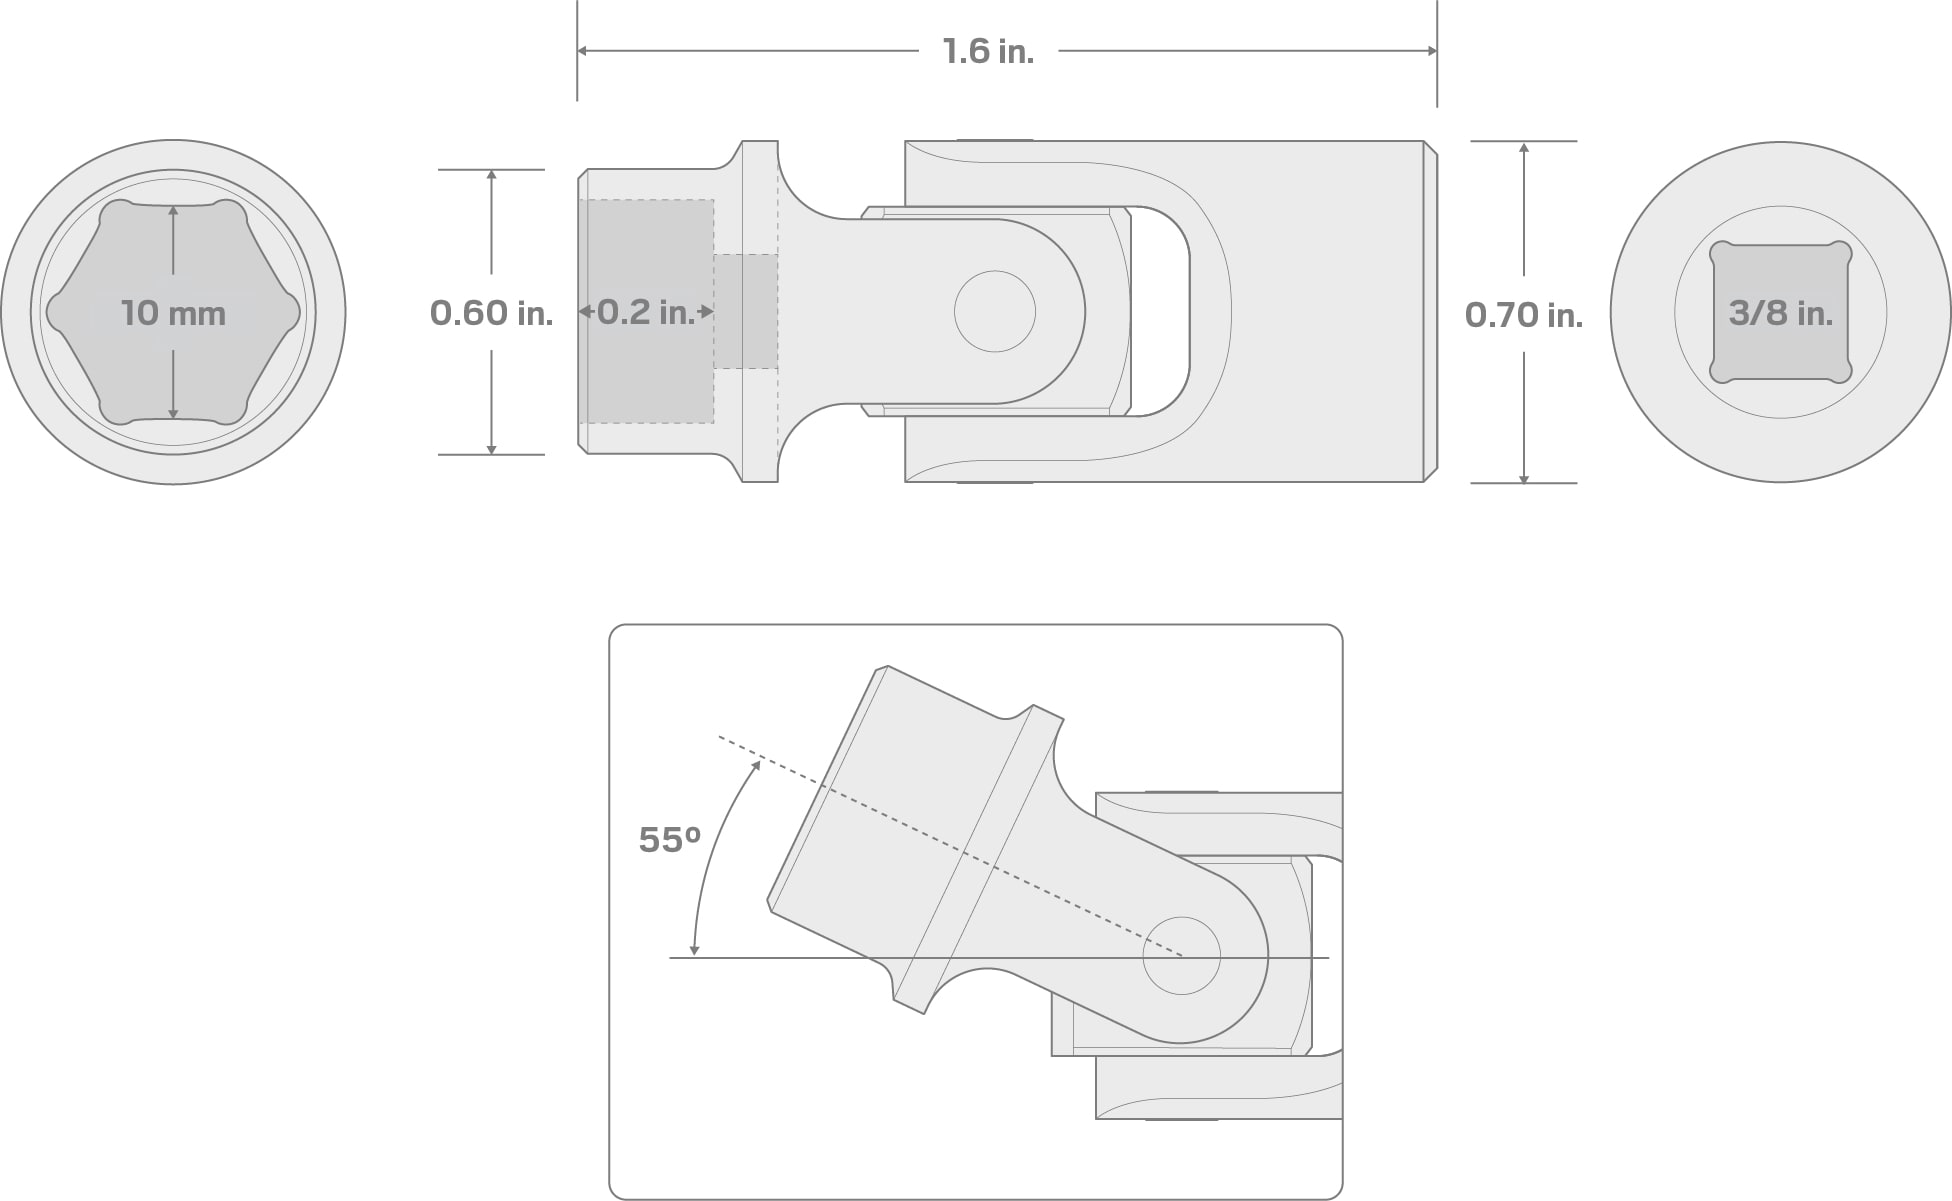 Specs for 3/8 Inch Drive x 10 mm Universal Joint Socket